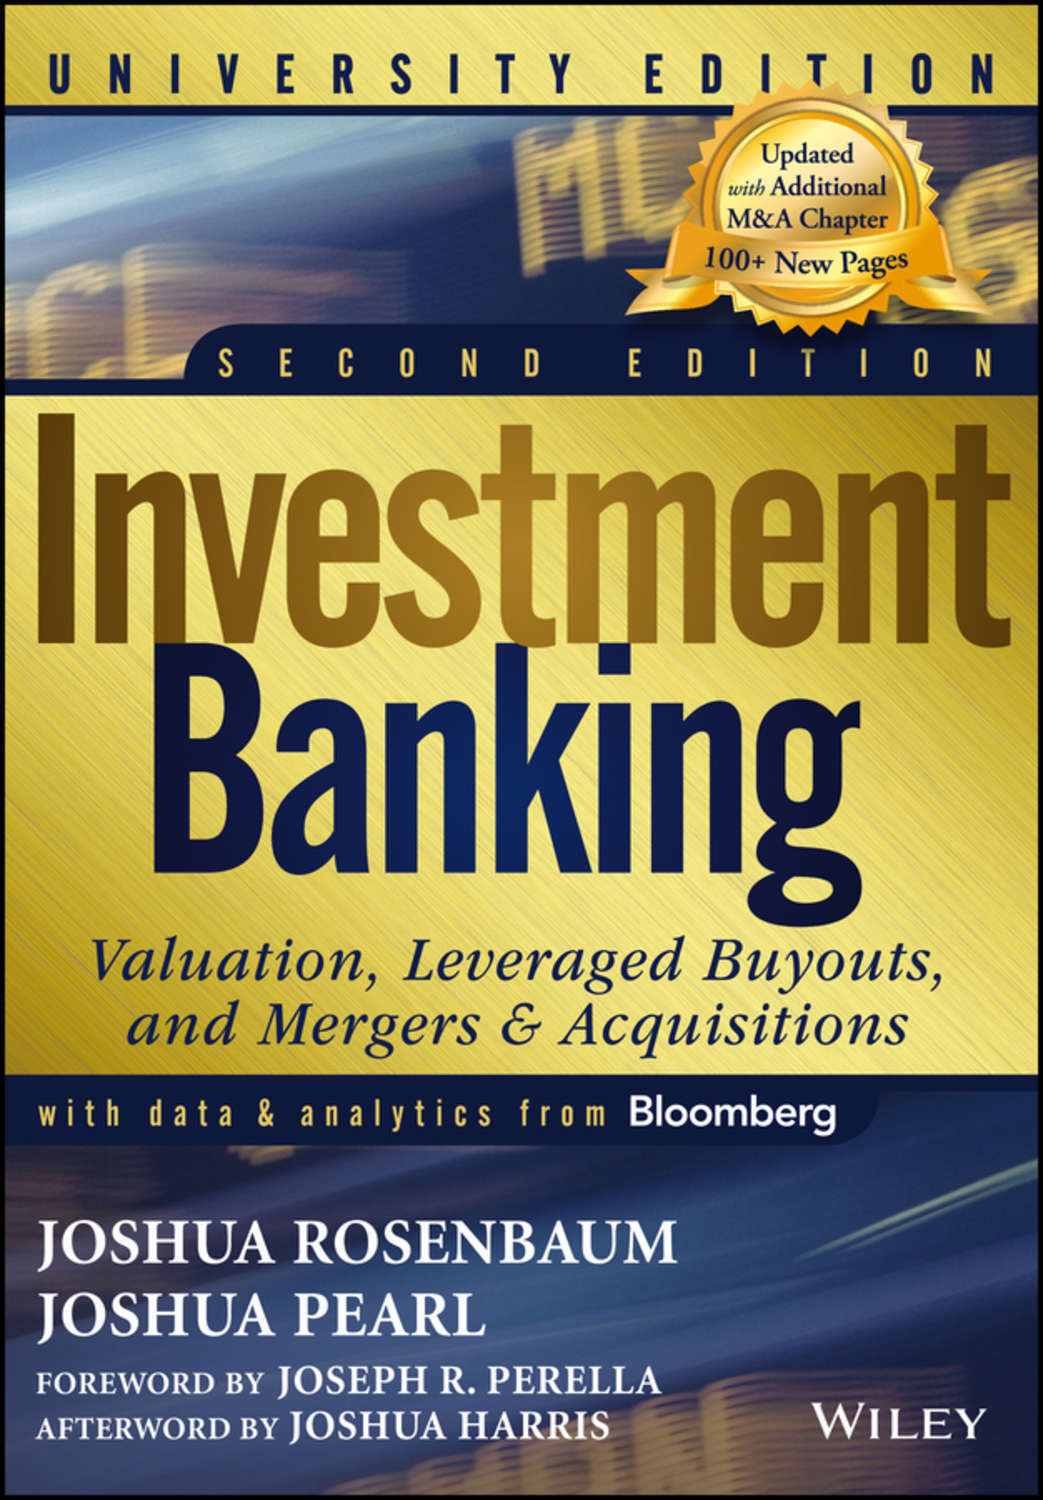 Banking book is. Investment Banking. Investment Banking Workbook. Leveraged buyouts.